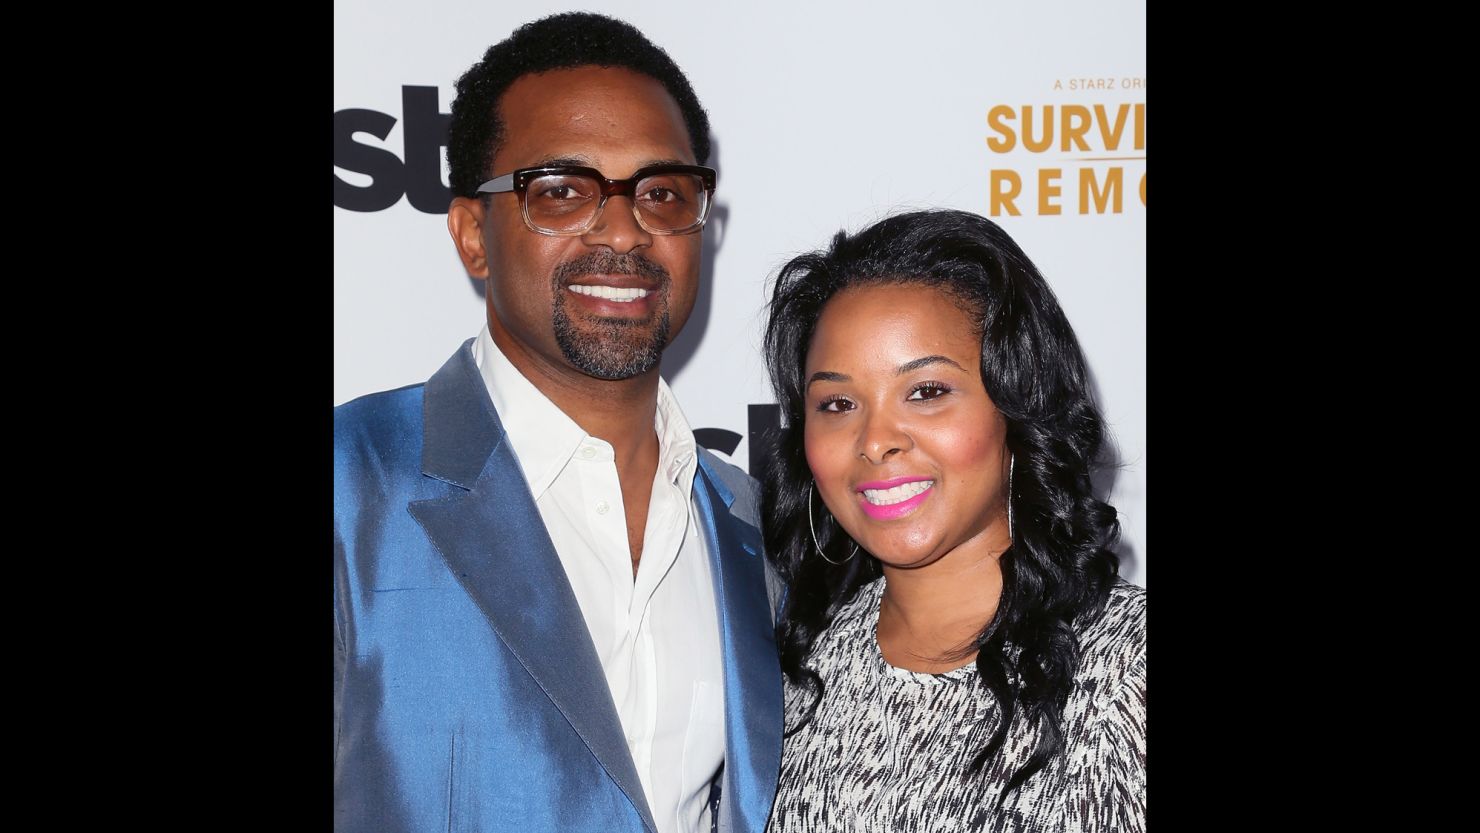 Actor Mike Epps' wife, Mechelle, got involved in a suspicious Twitter conversation. 